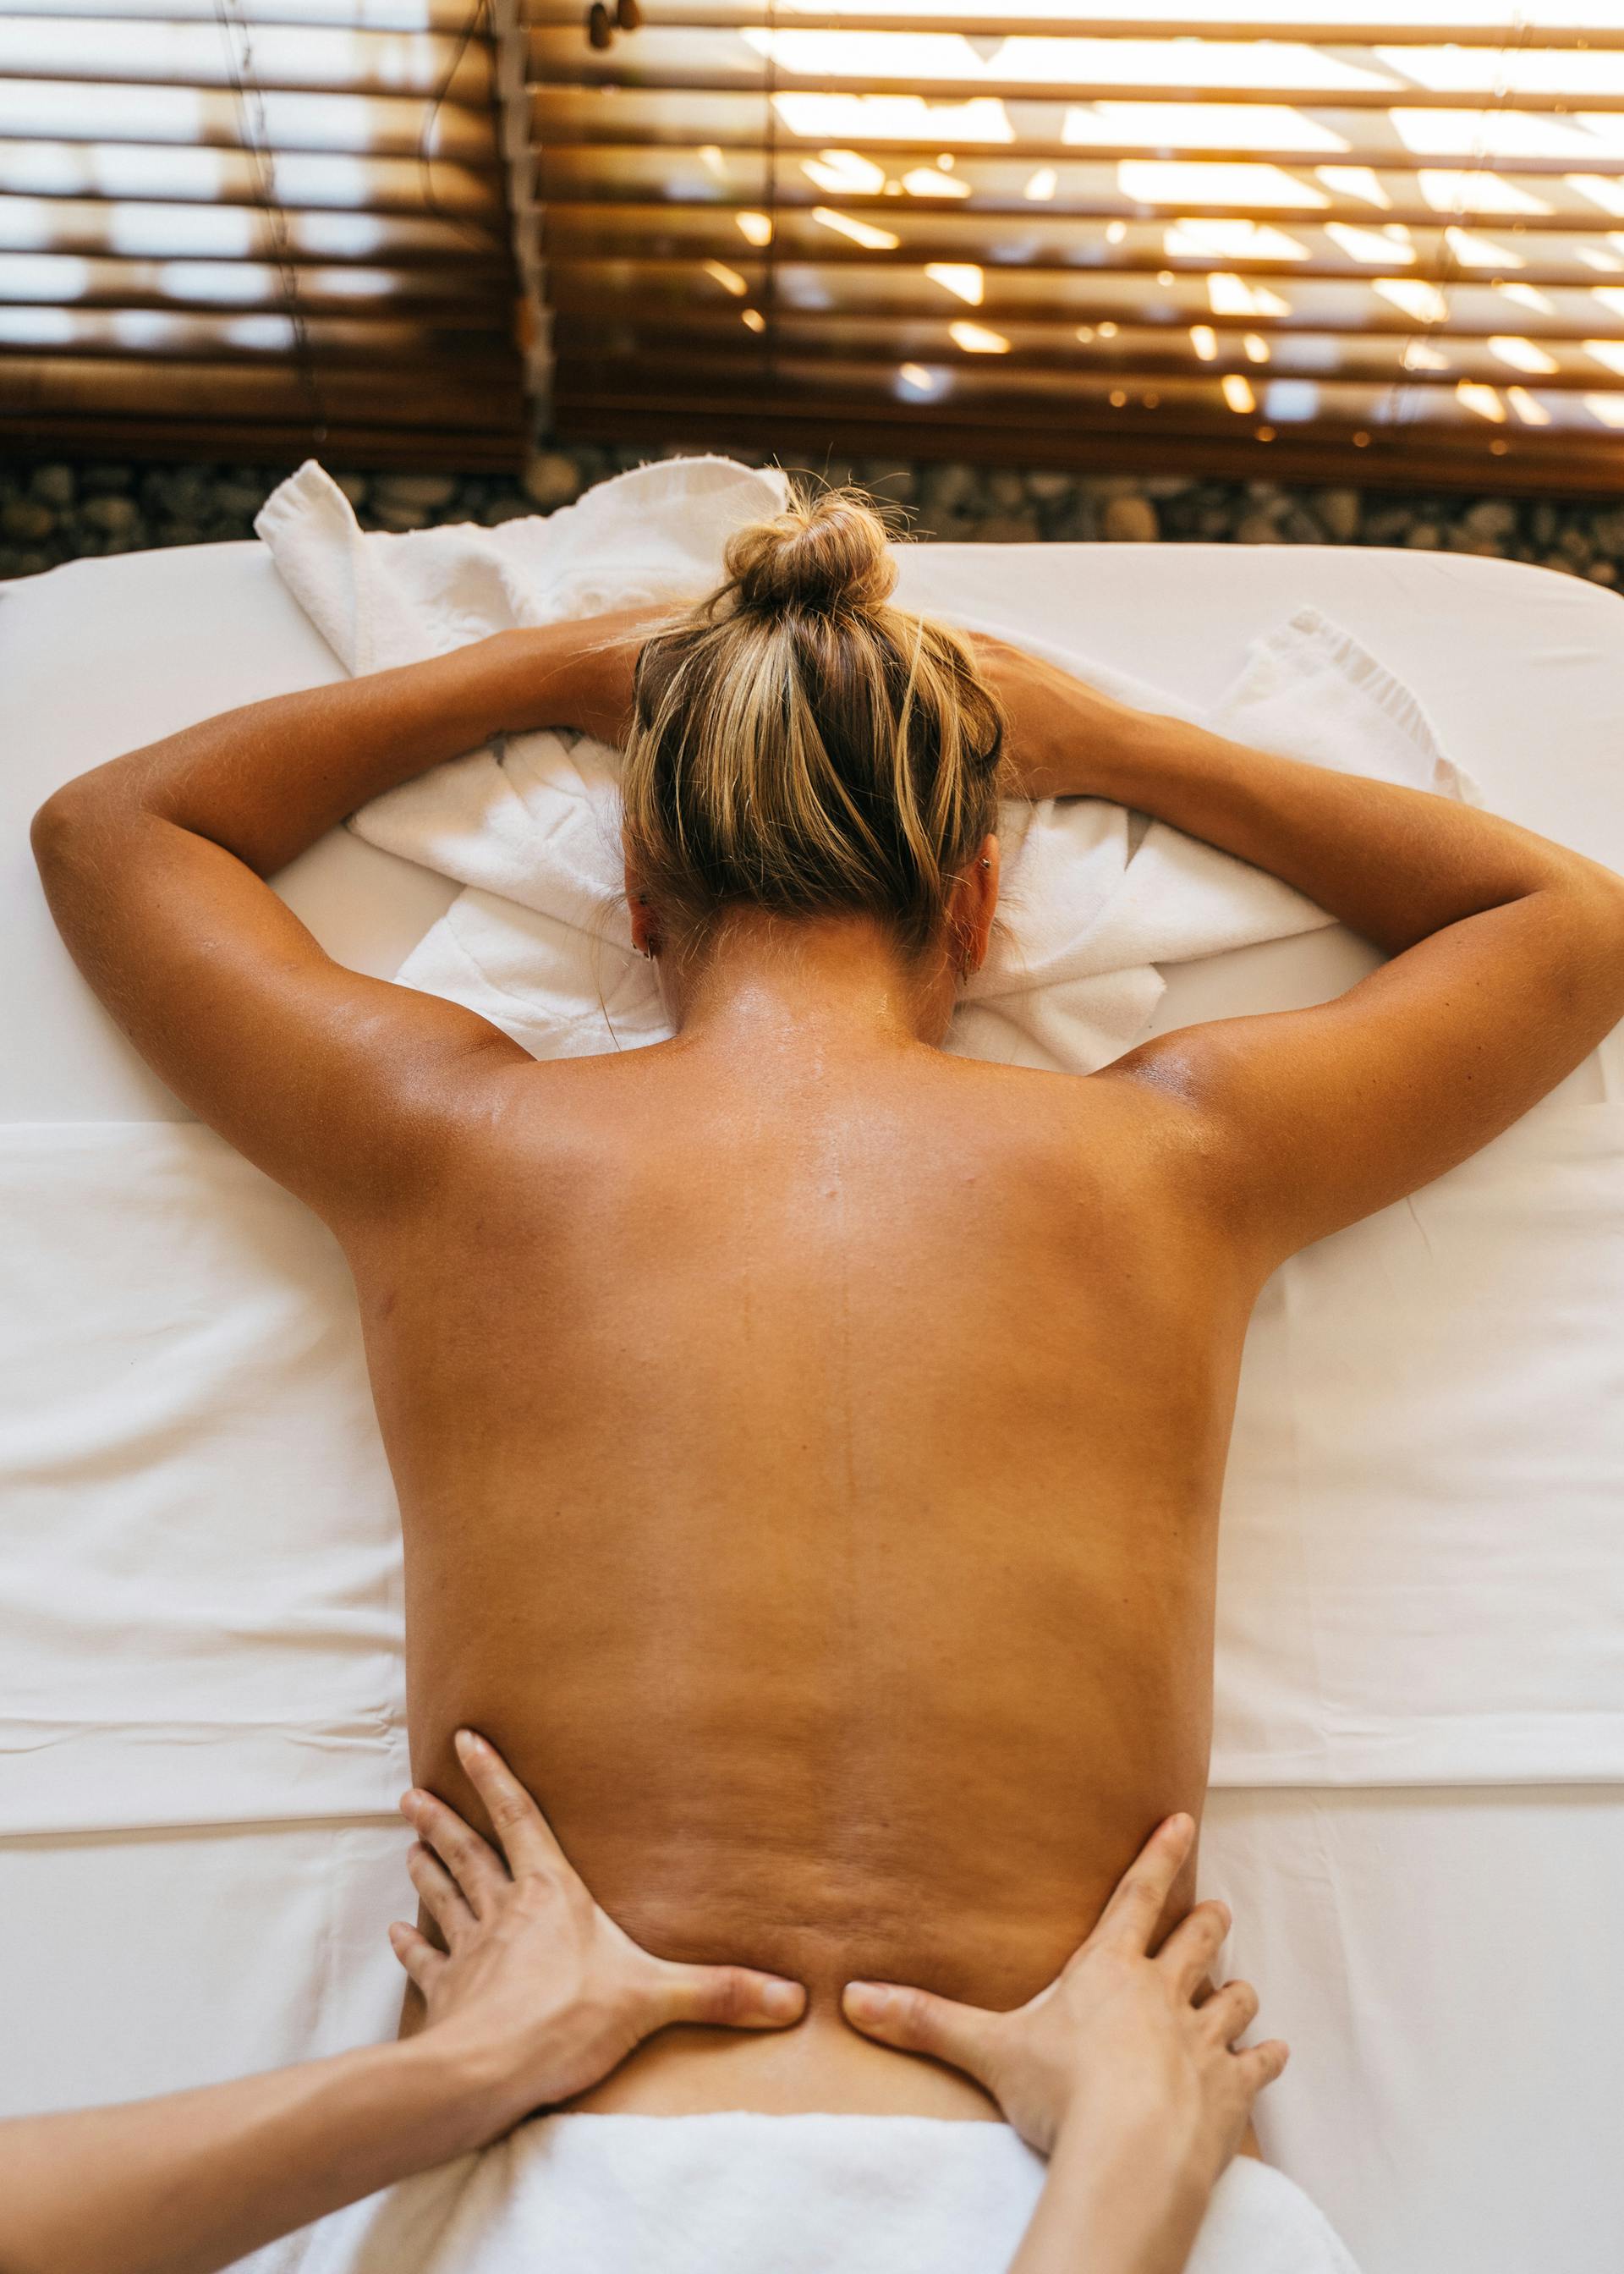 A woman getting a massage | Source: Pexels